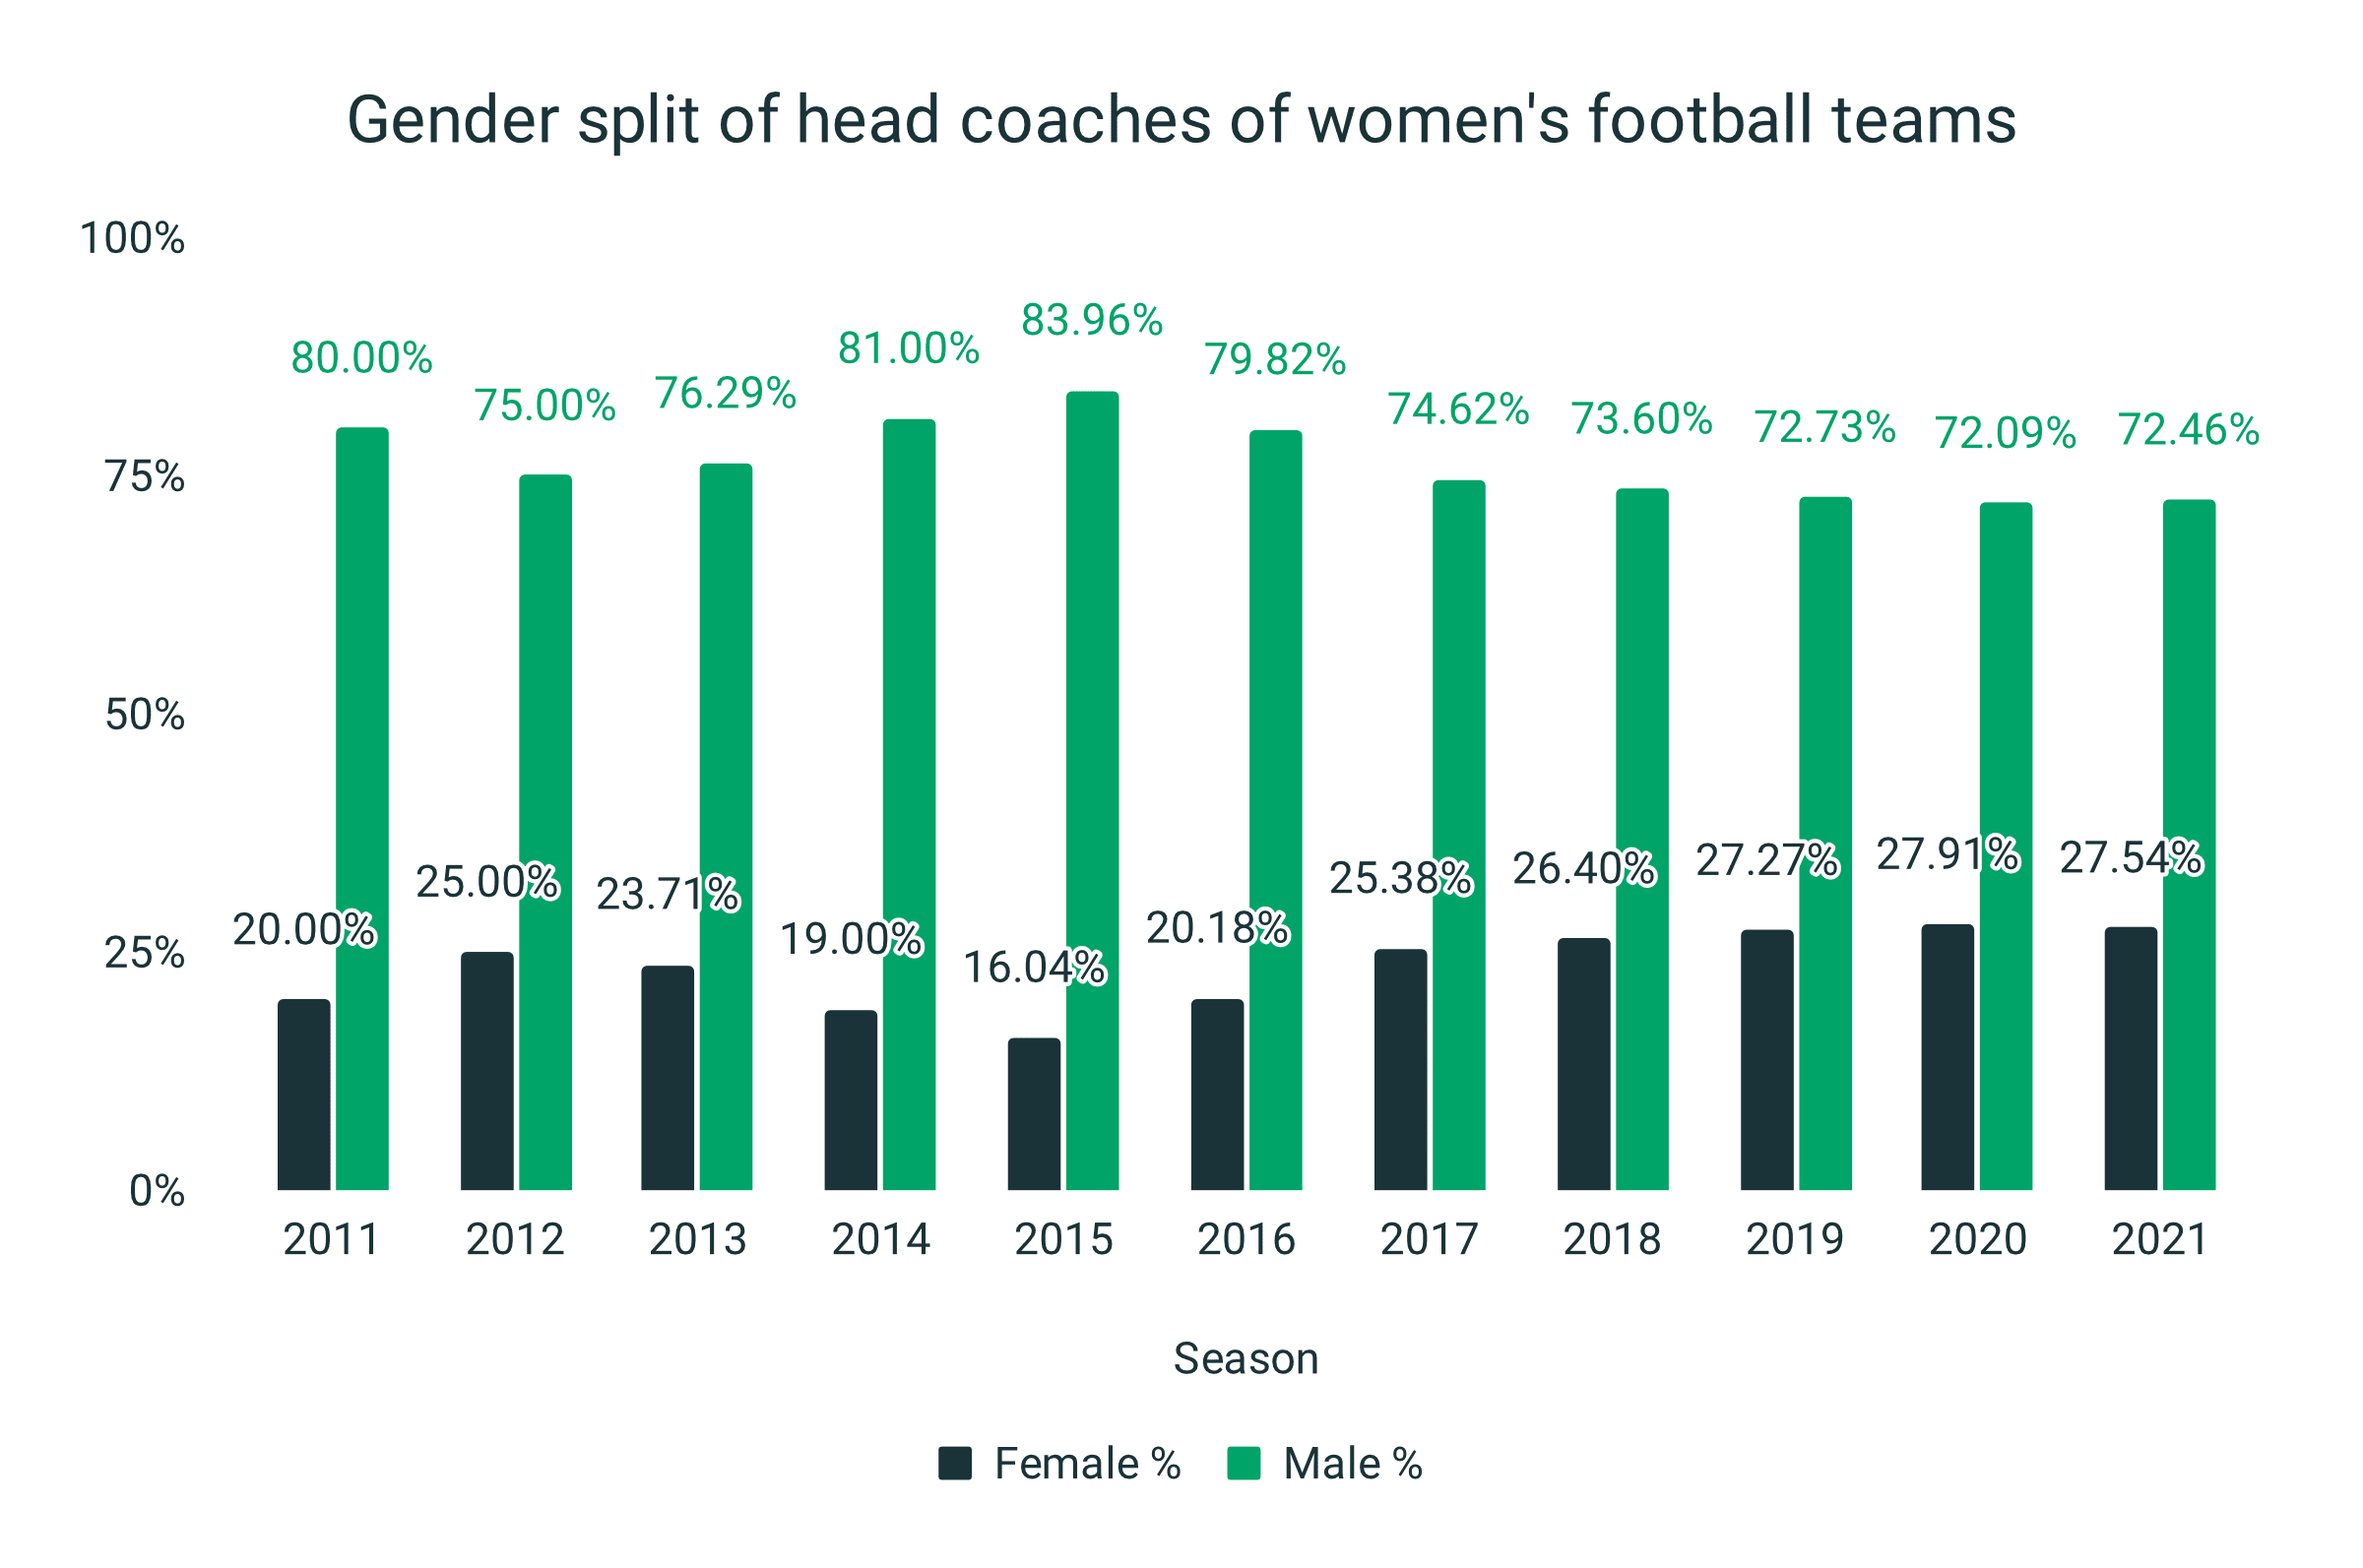 More female coaches than ever, long way still to go